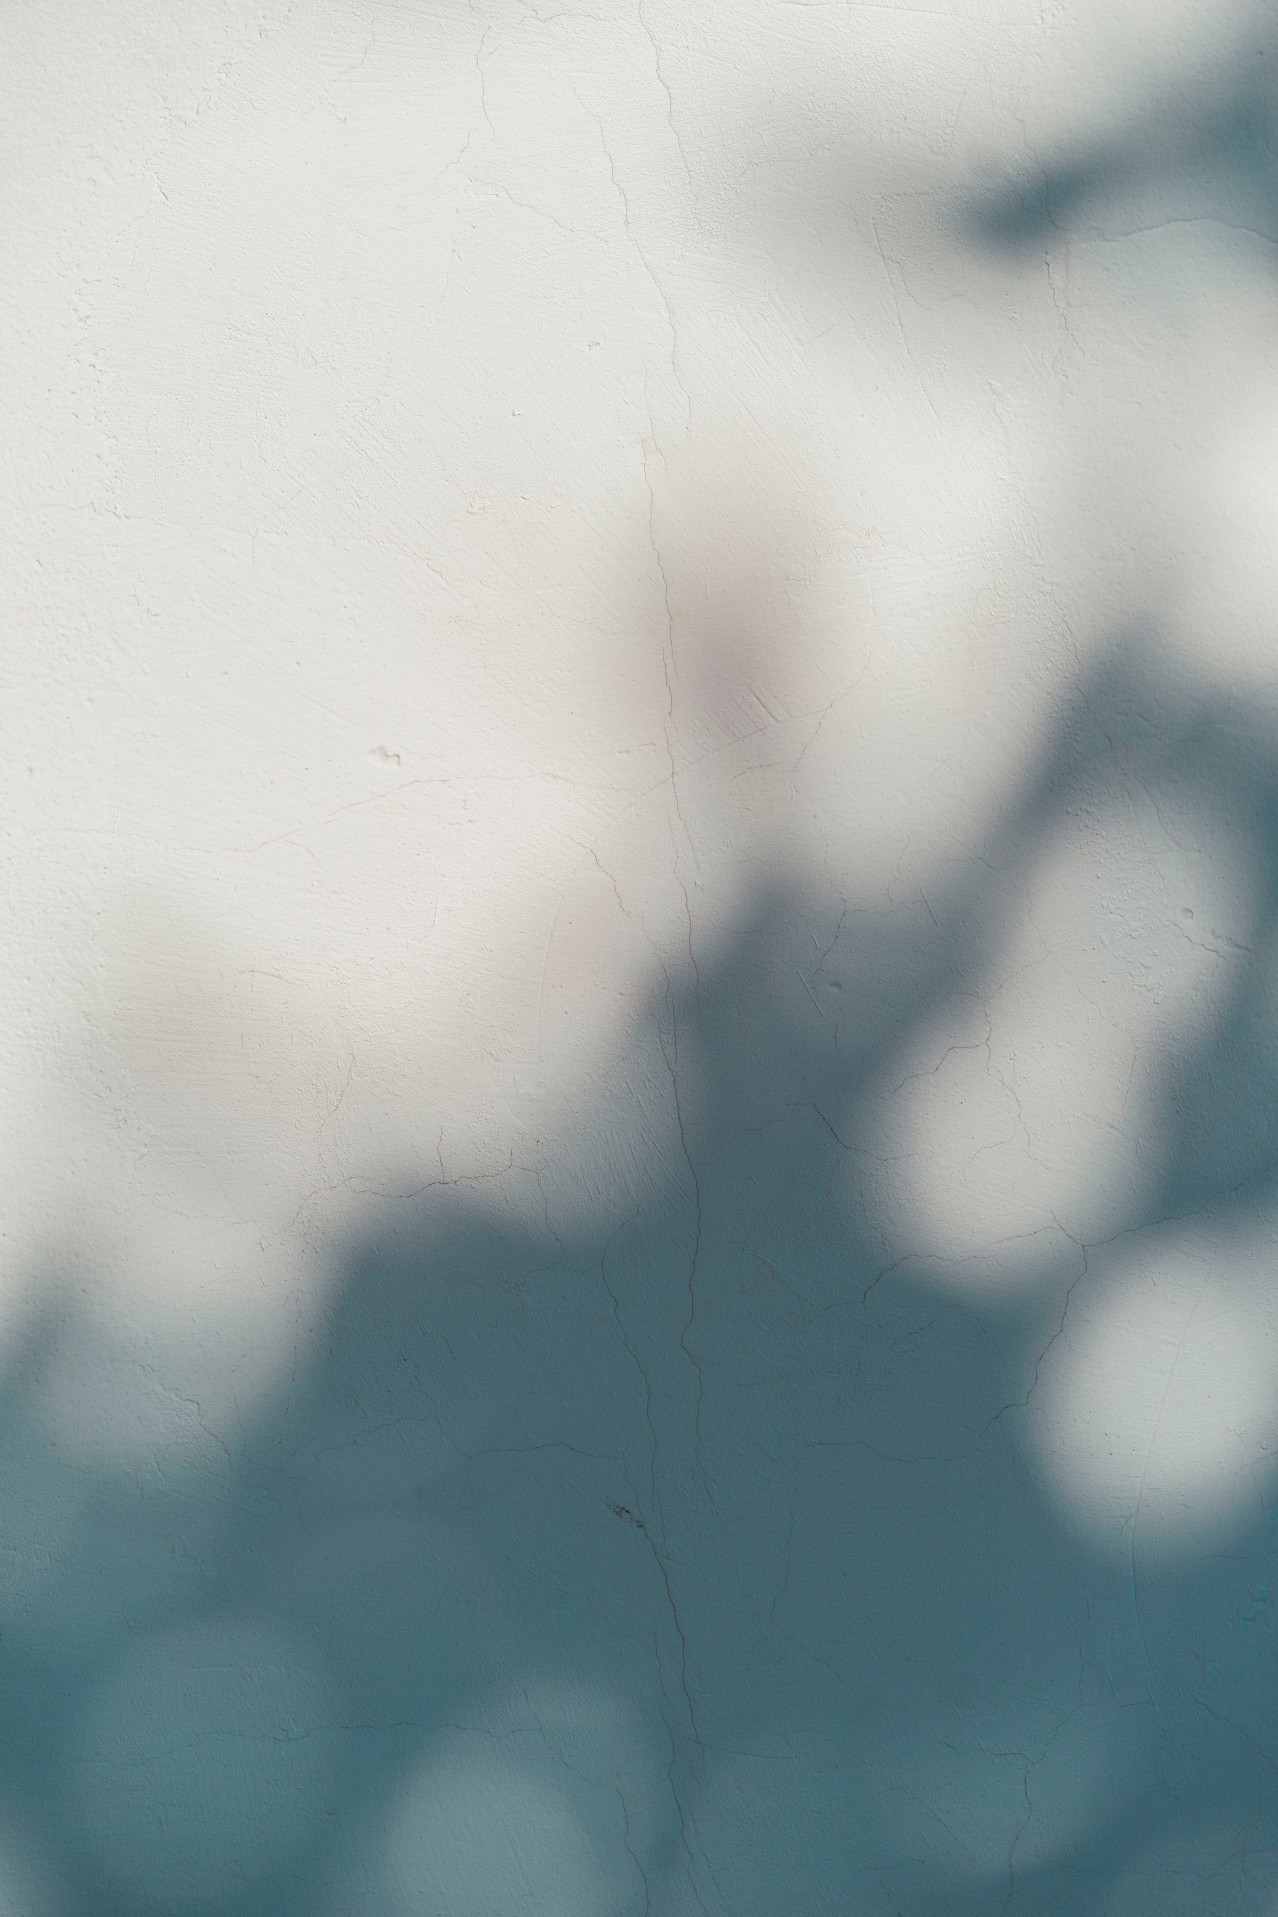 Texture with shadows on the wall